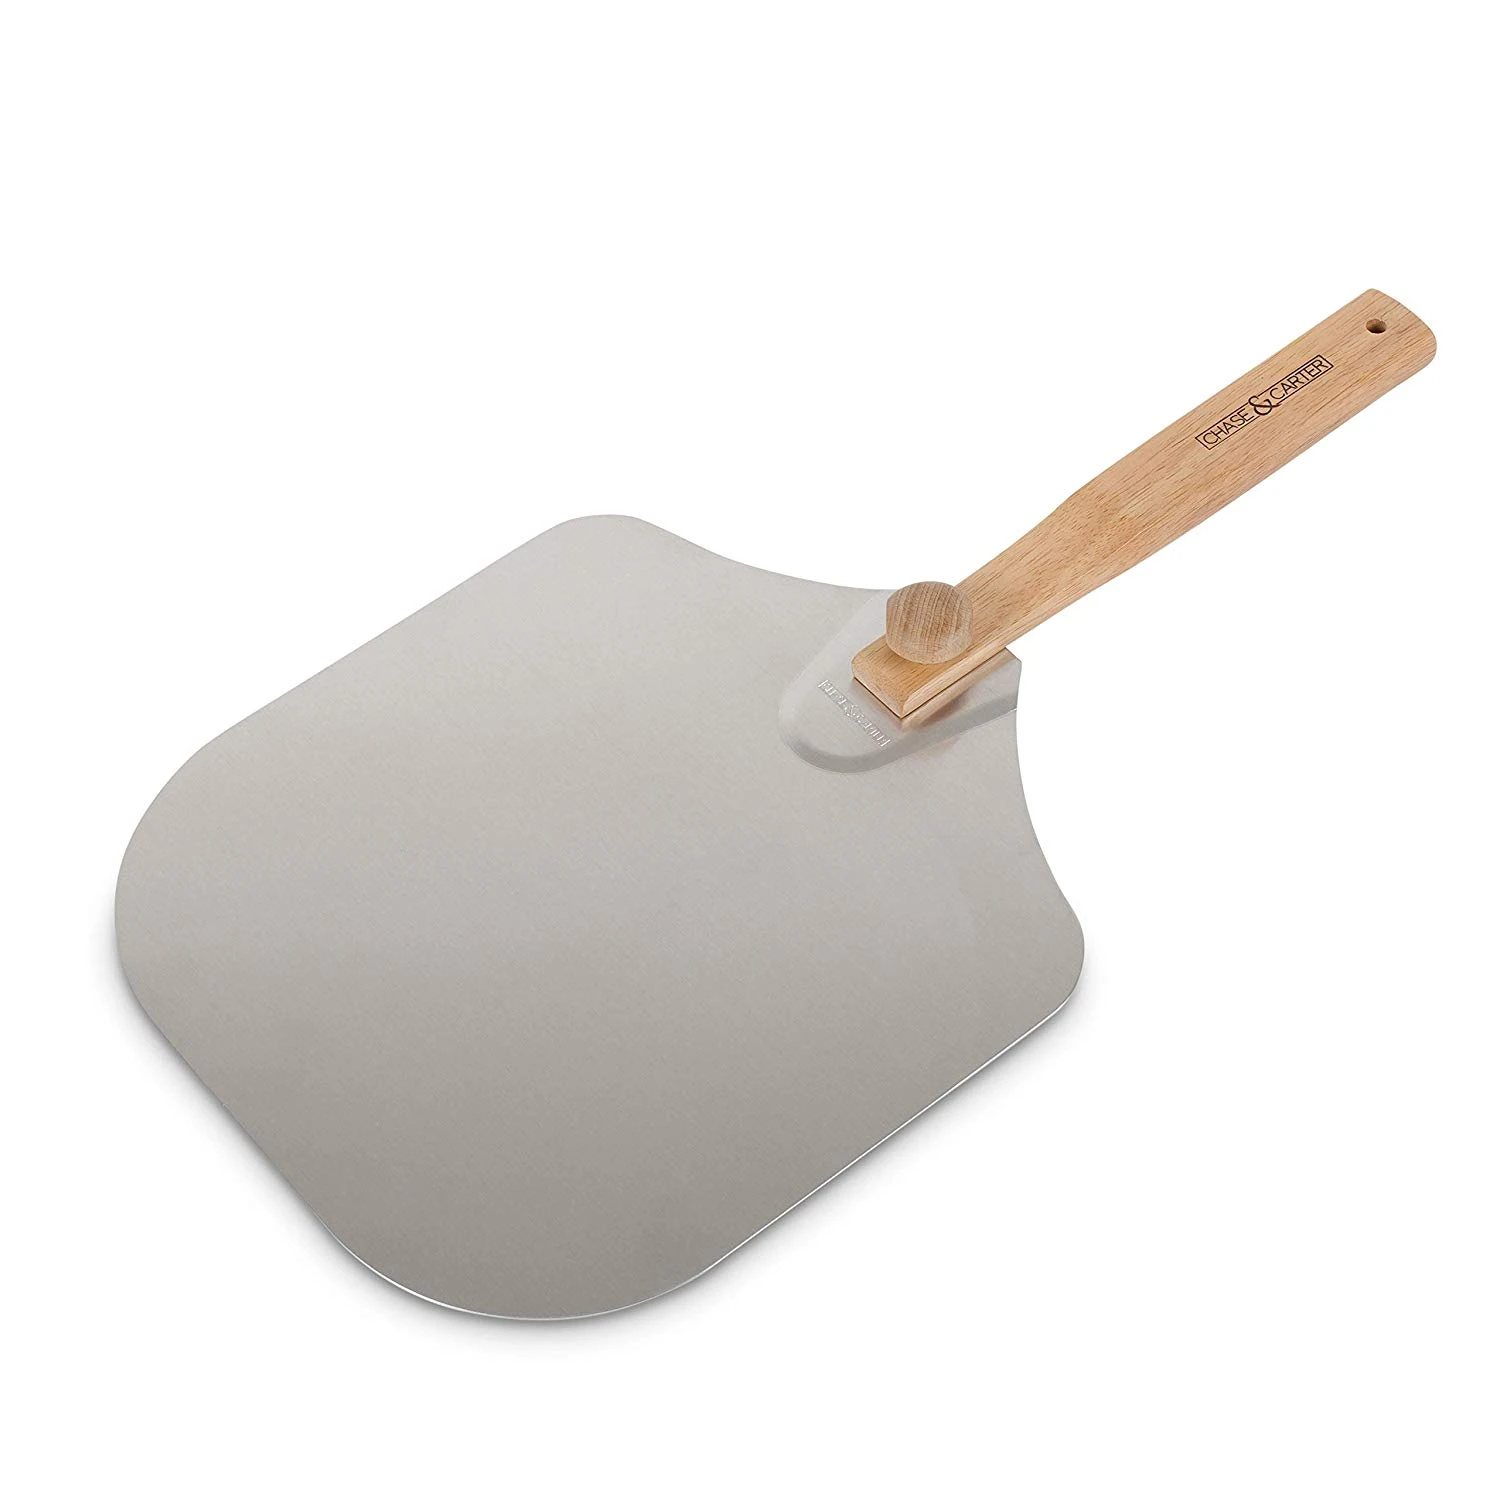 Easy to store aluminium pizza peel with detachable rubber wood handle for pizza cooking